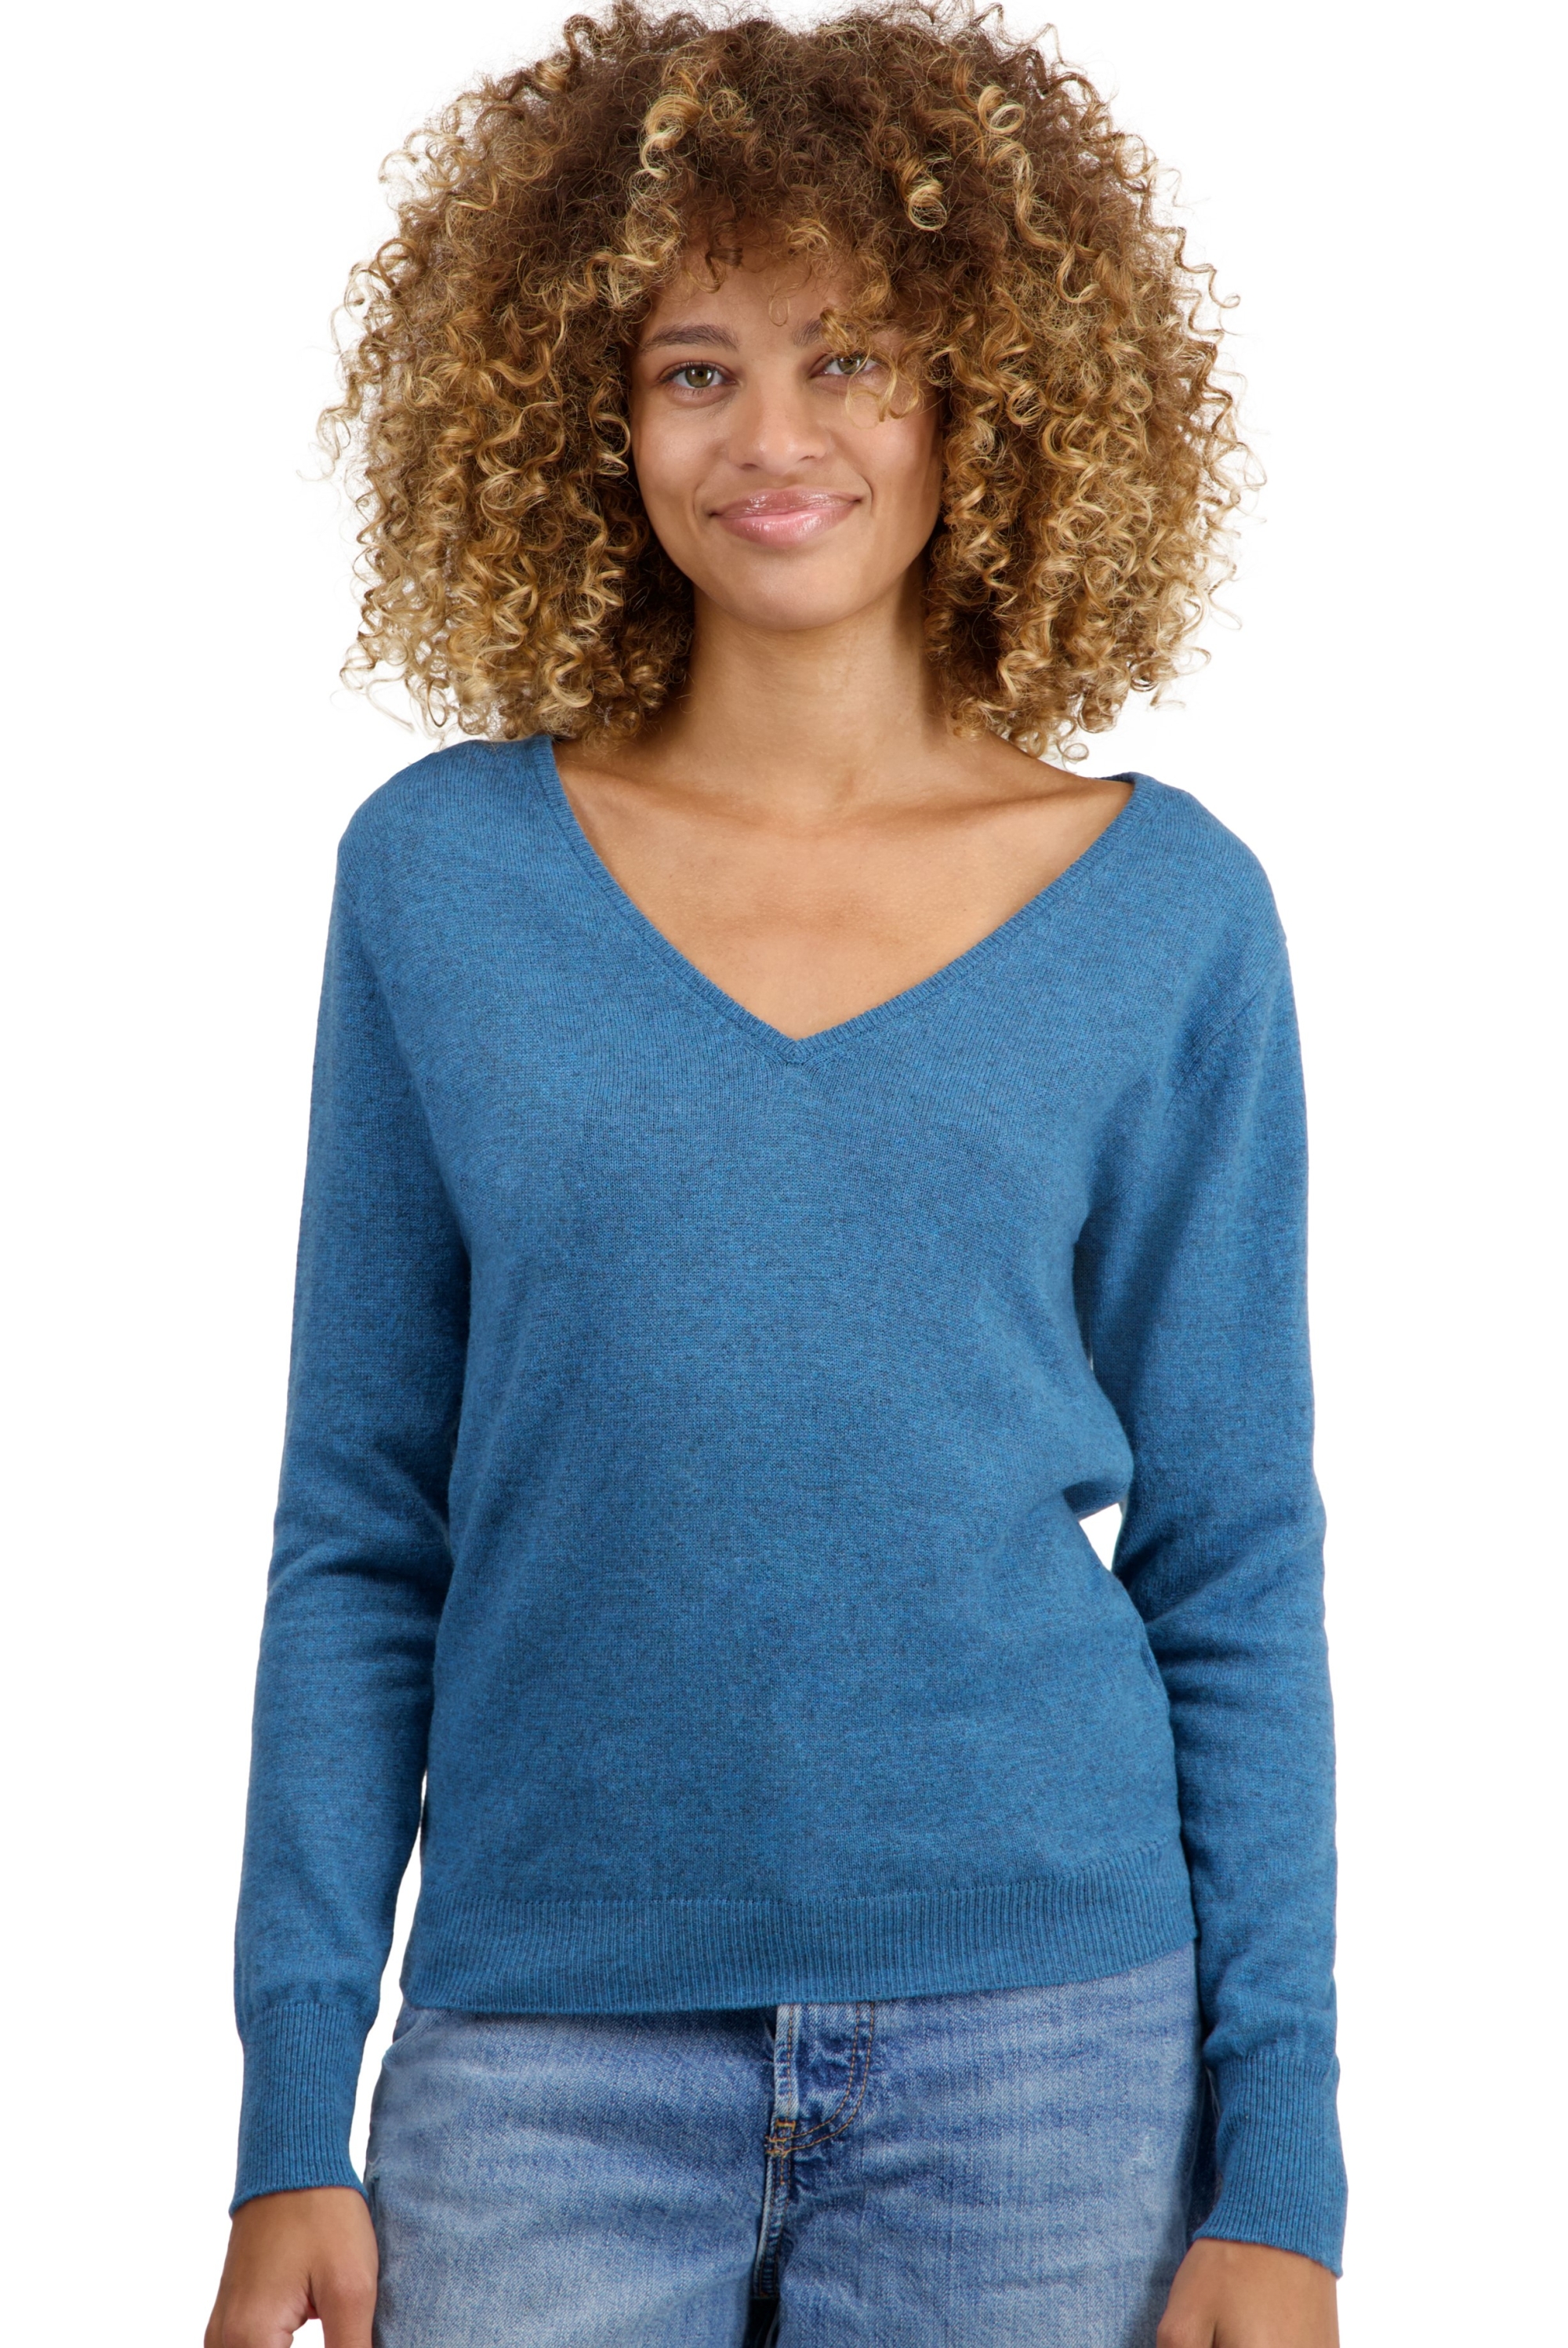 Cashmere ladies basic sweaters at low prices trieste first manor blue xl